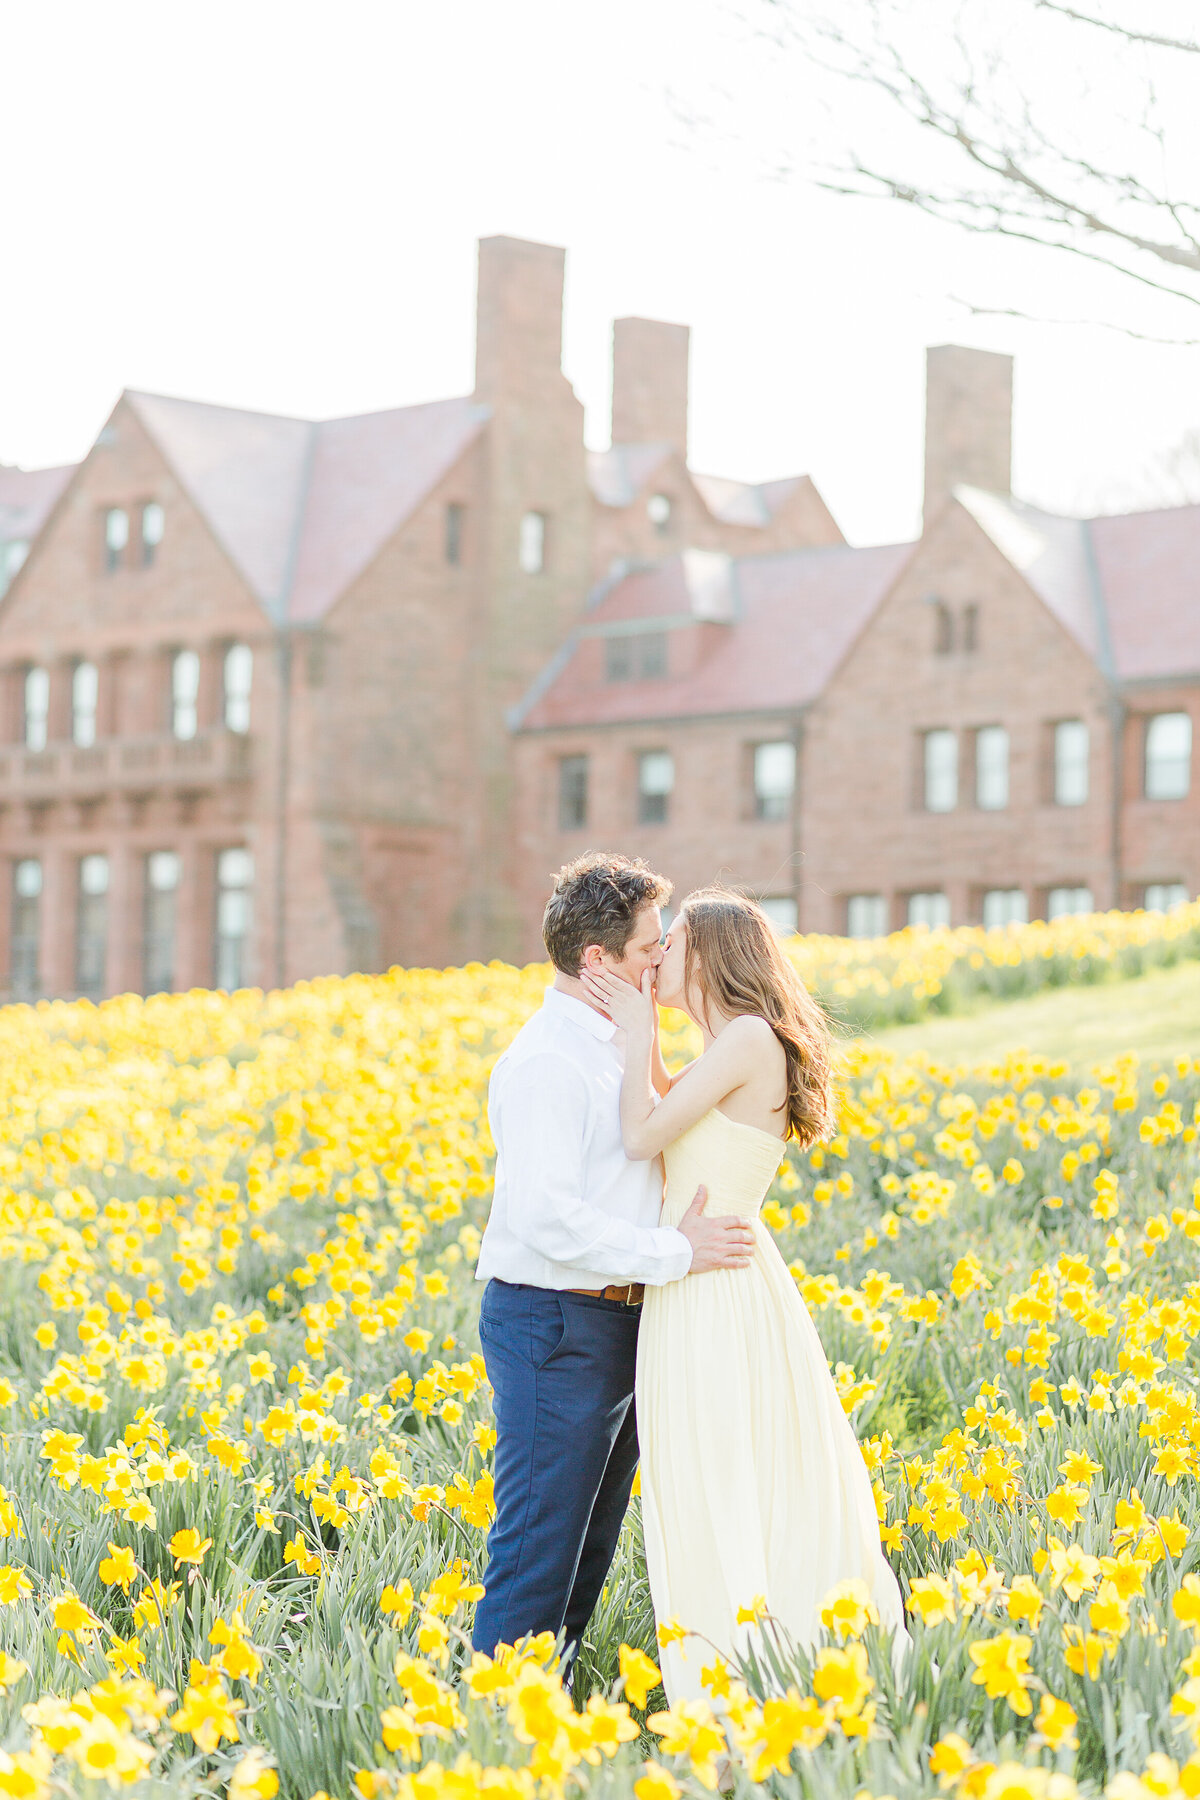 Couple share a kiss at Salve Regina's Cliff Walk amongst the daffodils for their engagement photoshoot. The buildings are featured prominently in the background. Captured by best RI engagement photographer Lia Rose Weddings/